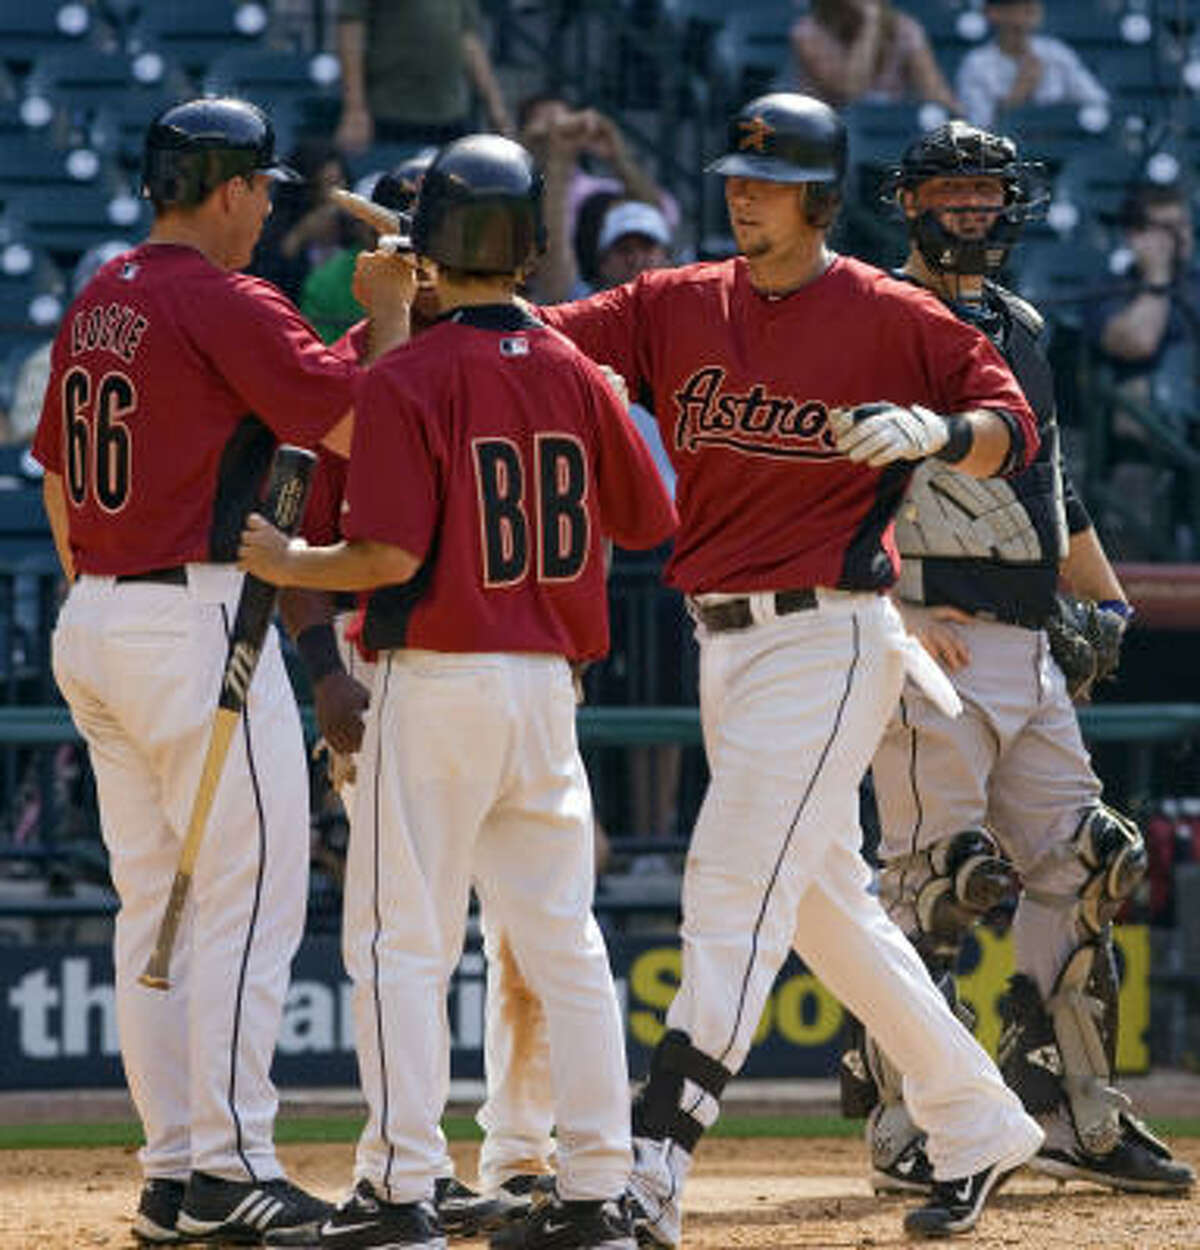 Houston's Chris Johnson, right, is congratulated by teammate Andrew Locke after hitting a home run in the ninth inning.